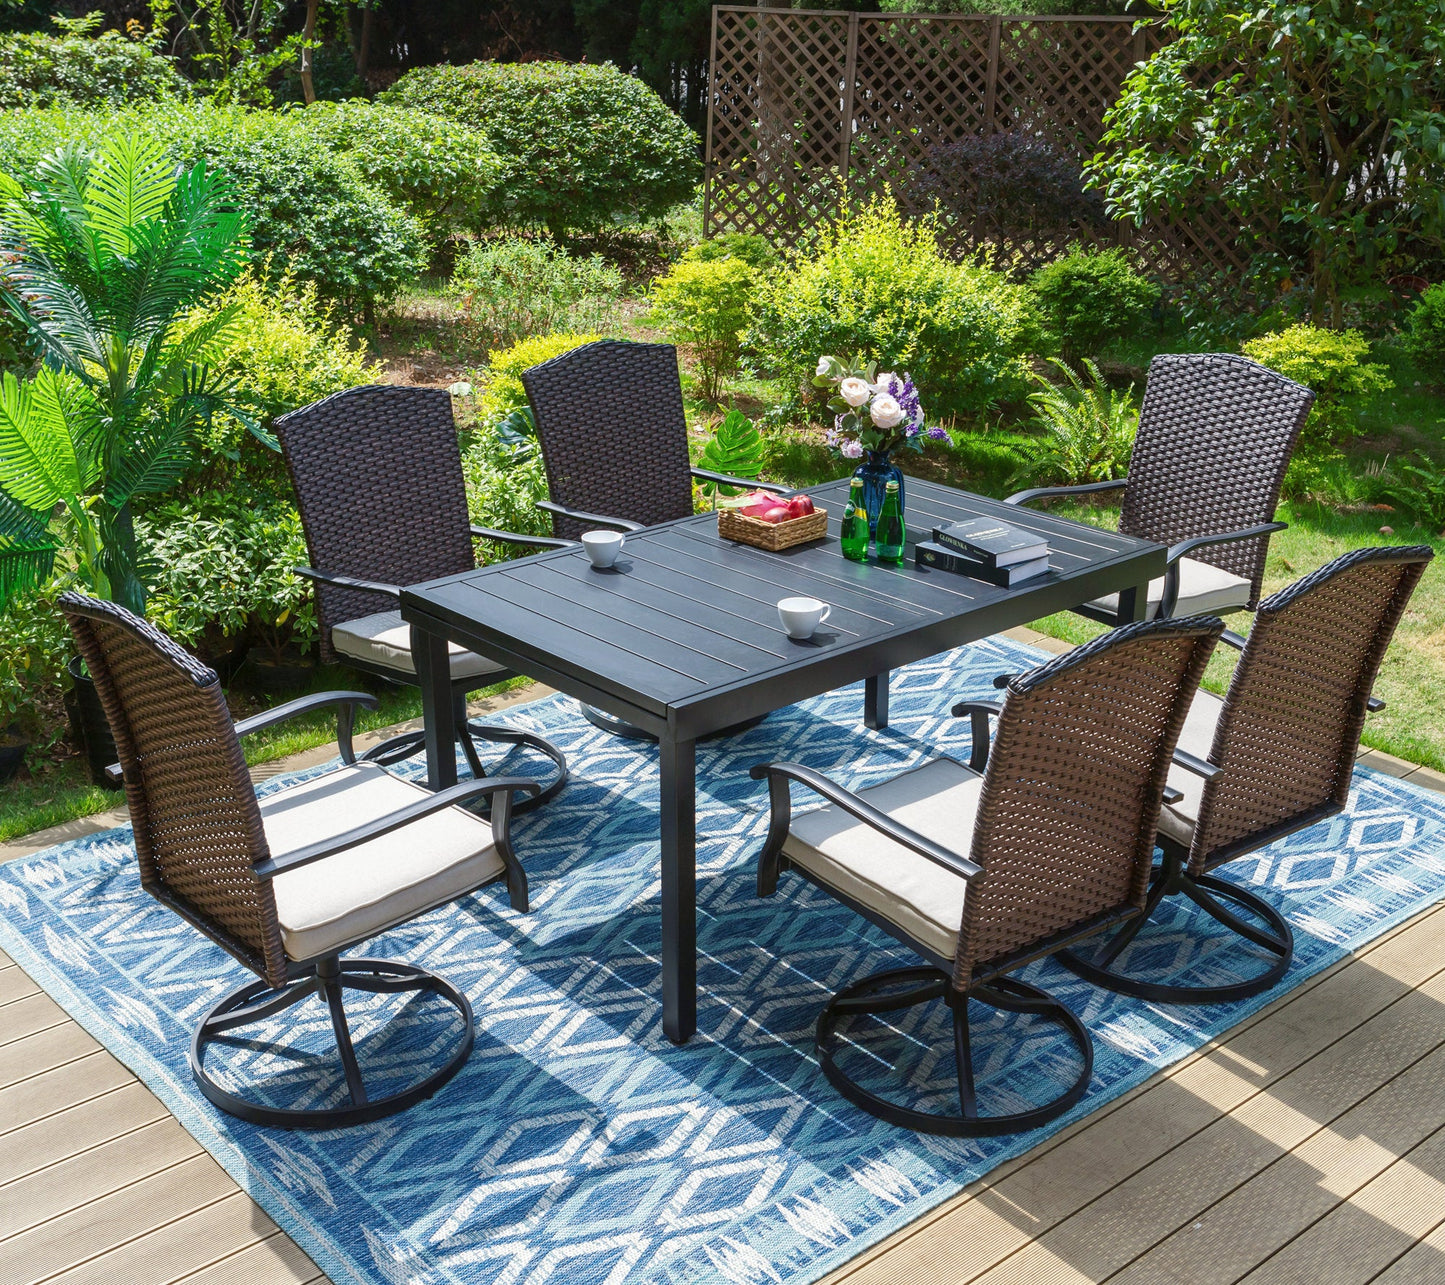 Sophia & William 7 Pieces Patio Dining Set Metal Chairs & Extendable Table